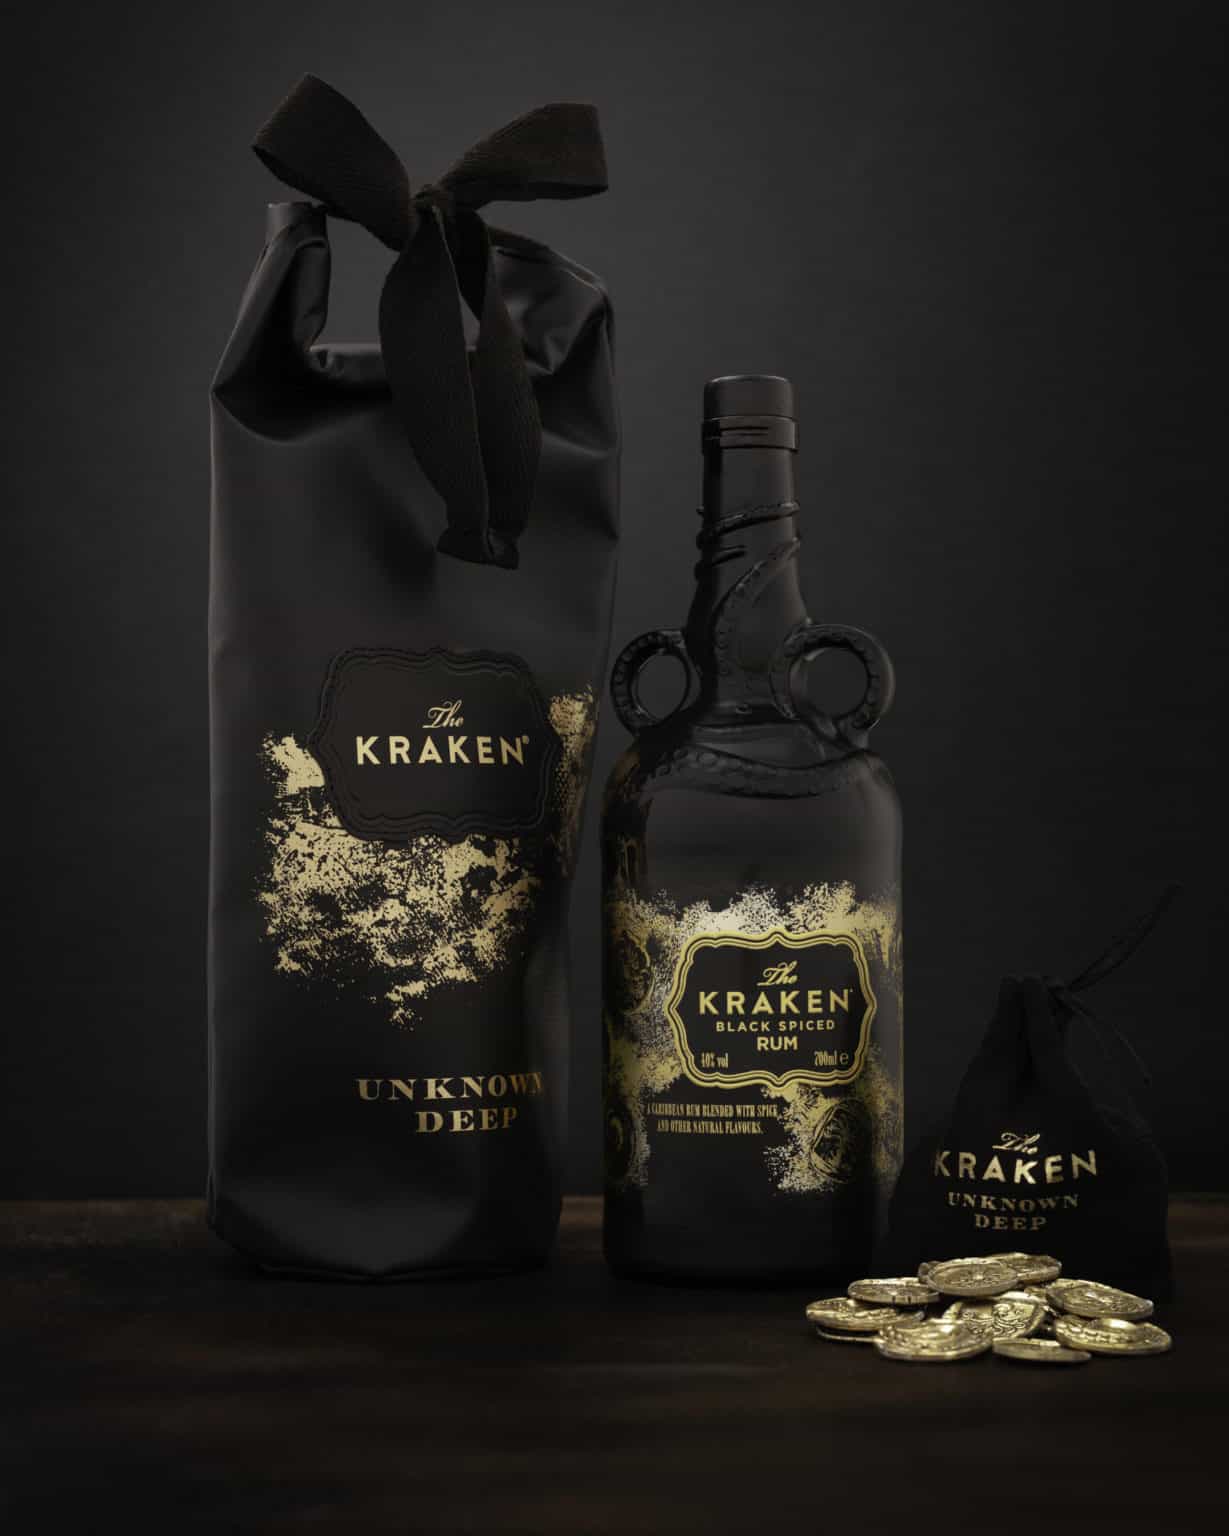 THE KRAKEN LAUNCHES NEW LIMITED EDITION BOTTLE UKNOWN DEEP